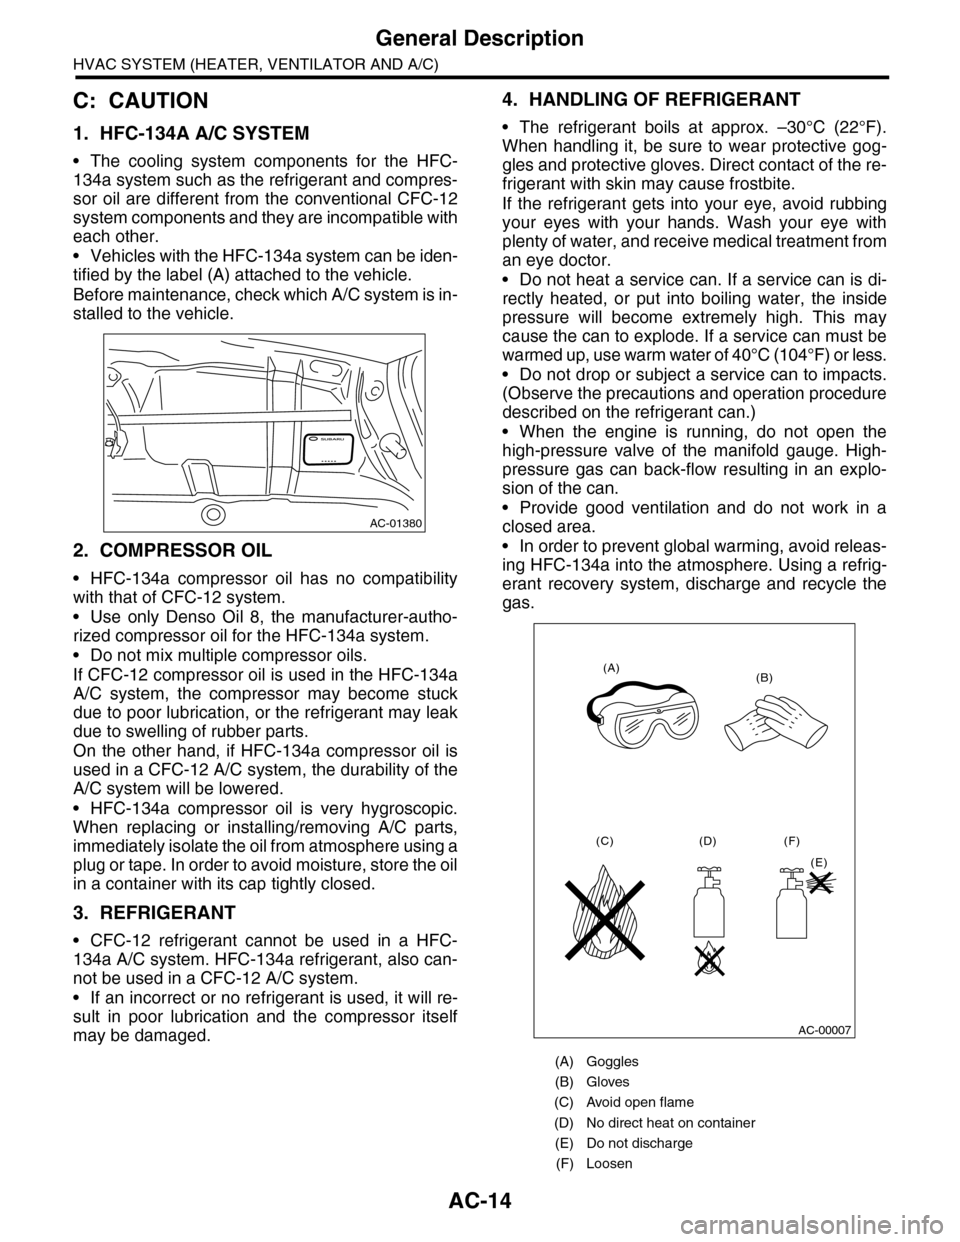 SUBARU TRIBECA 2009 1.G Service Workshop Manual AC-14
General Description
HVAC SYSTEM (HEATER, VENTILATOR AND A/C)
C: CAUTION
1. HFC-134A A/C SYSTEM
•The cooling system components for the HFC-
134a system such as the refrigerant and compres-
sor 